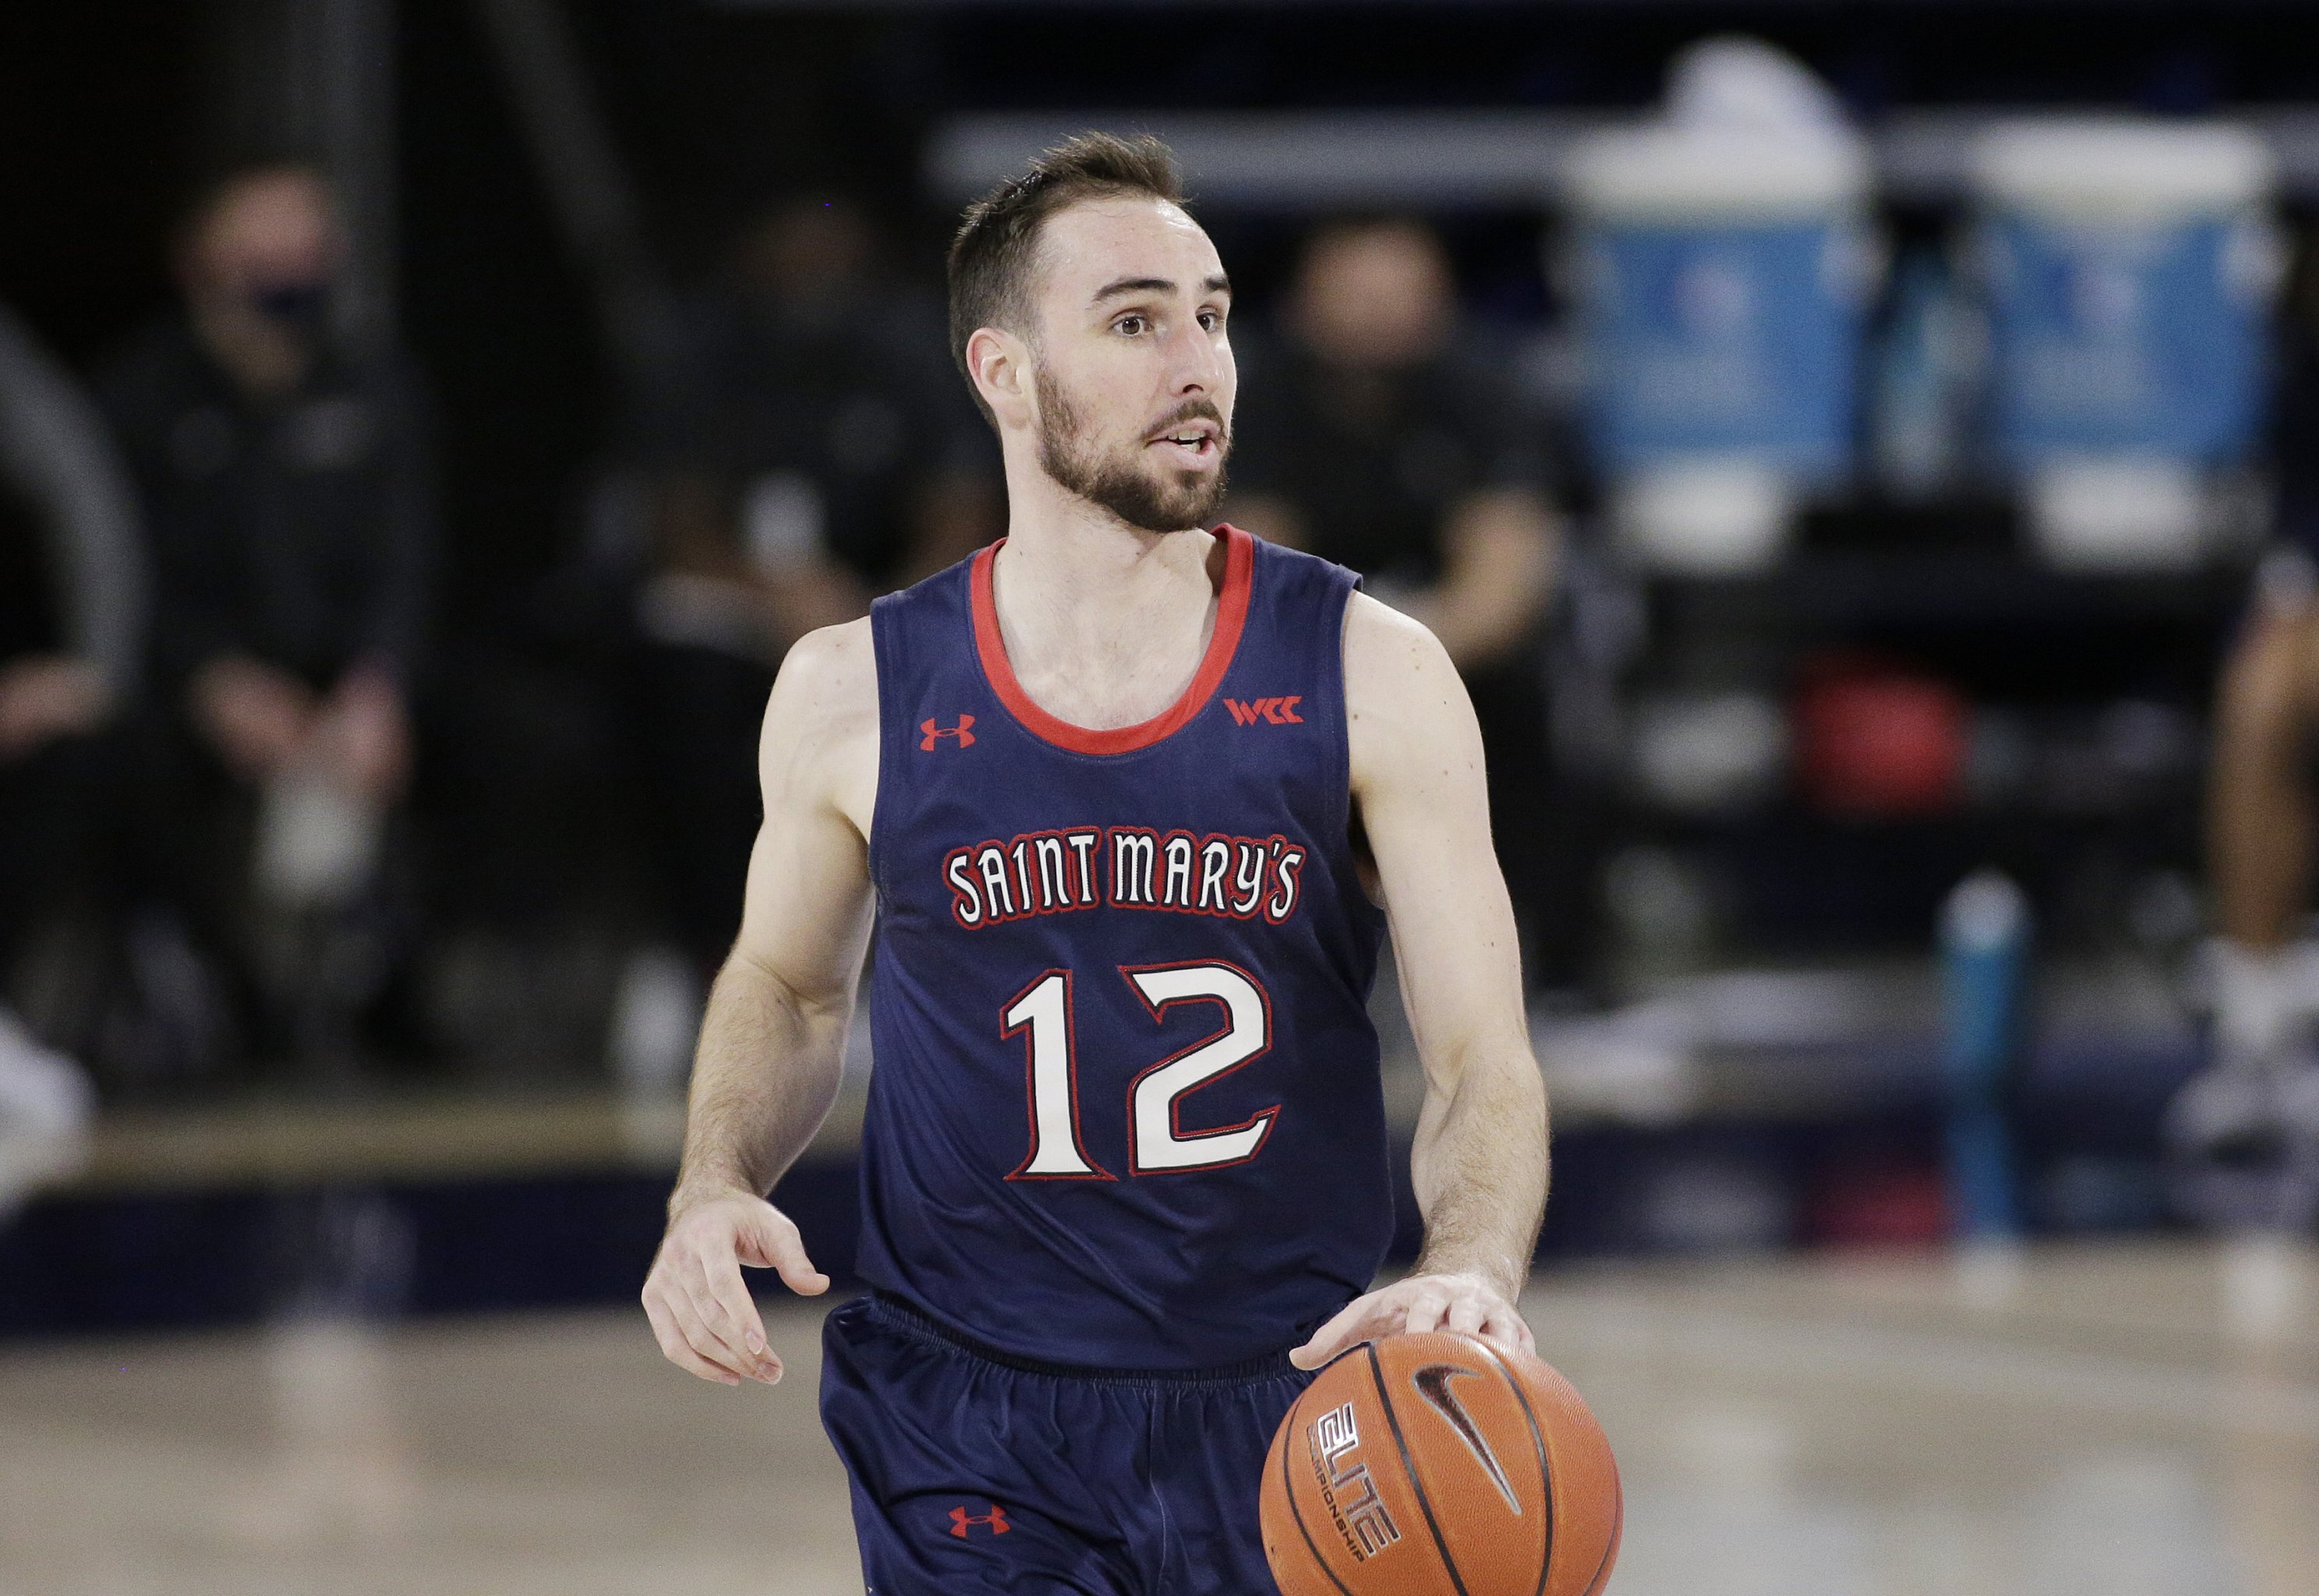 Johnson scores 27 to lead No. 17 Saint Mary's past BYU 71-65